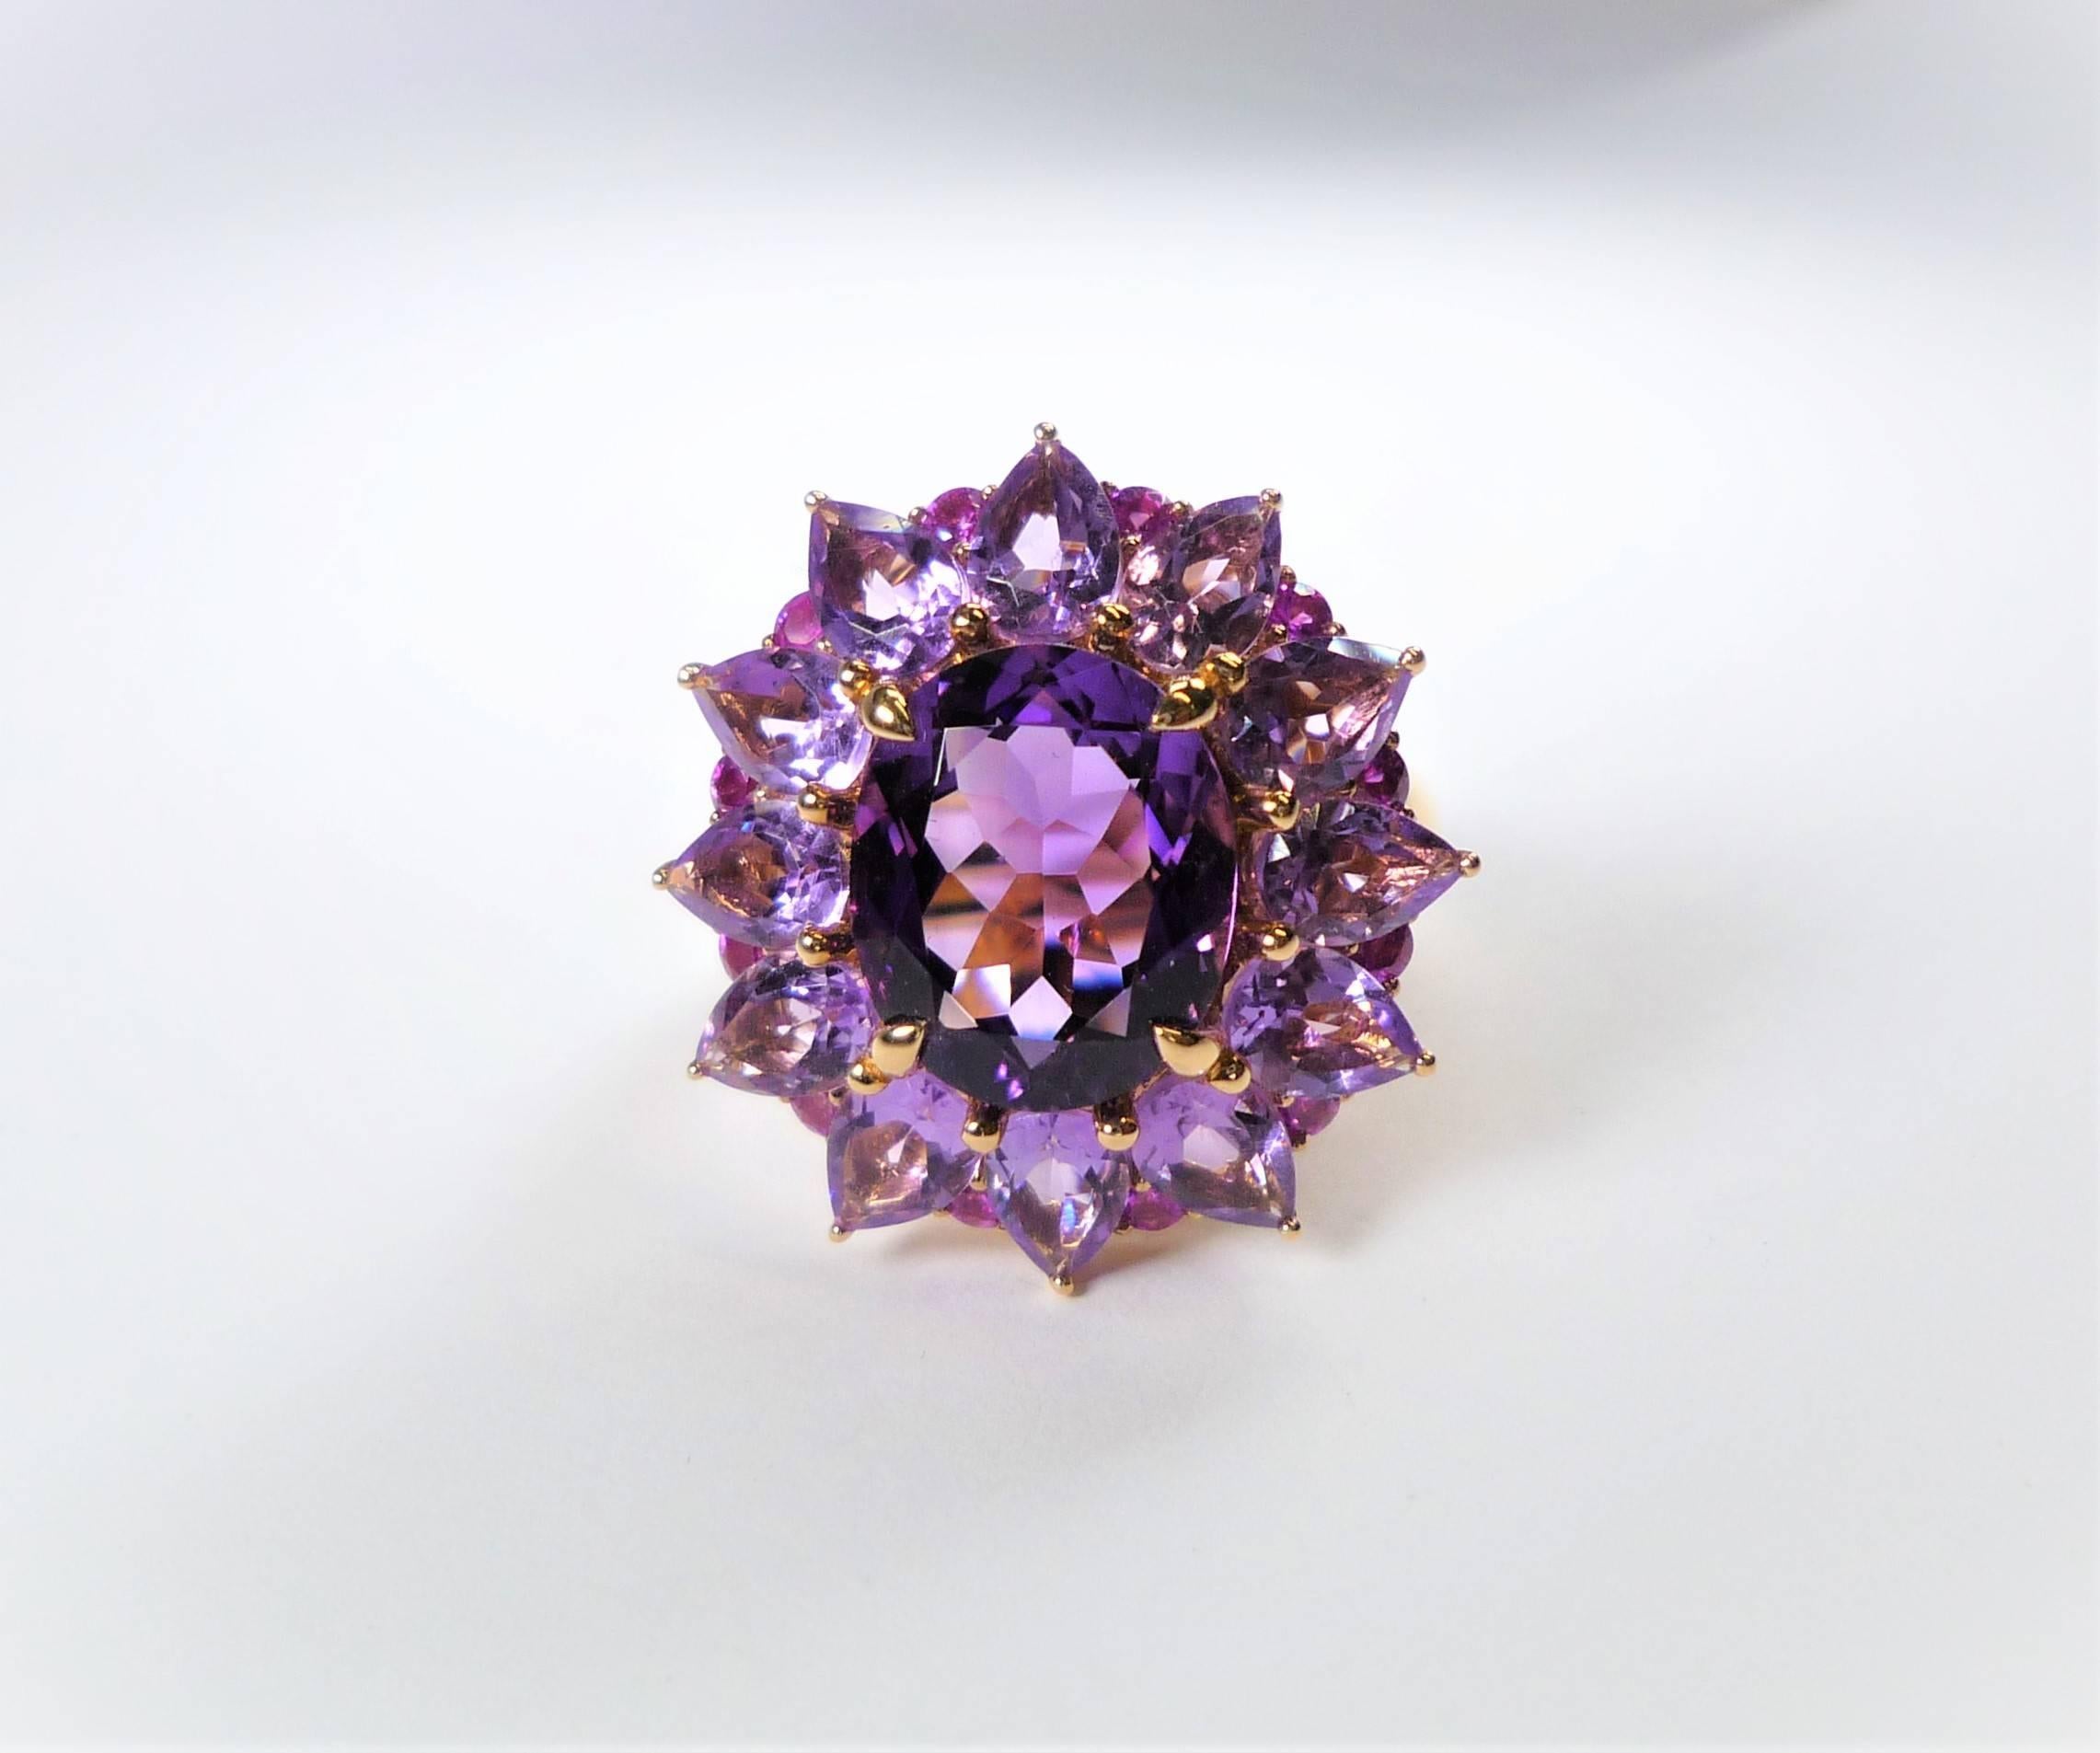 Handmade Cocktail Ring with 1 Amethyst, 4 ct., surrounded by
12 Amethyst-Tears and 12 Pink Sapphires, 18 kt. Redgold